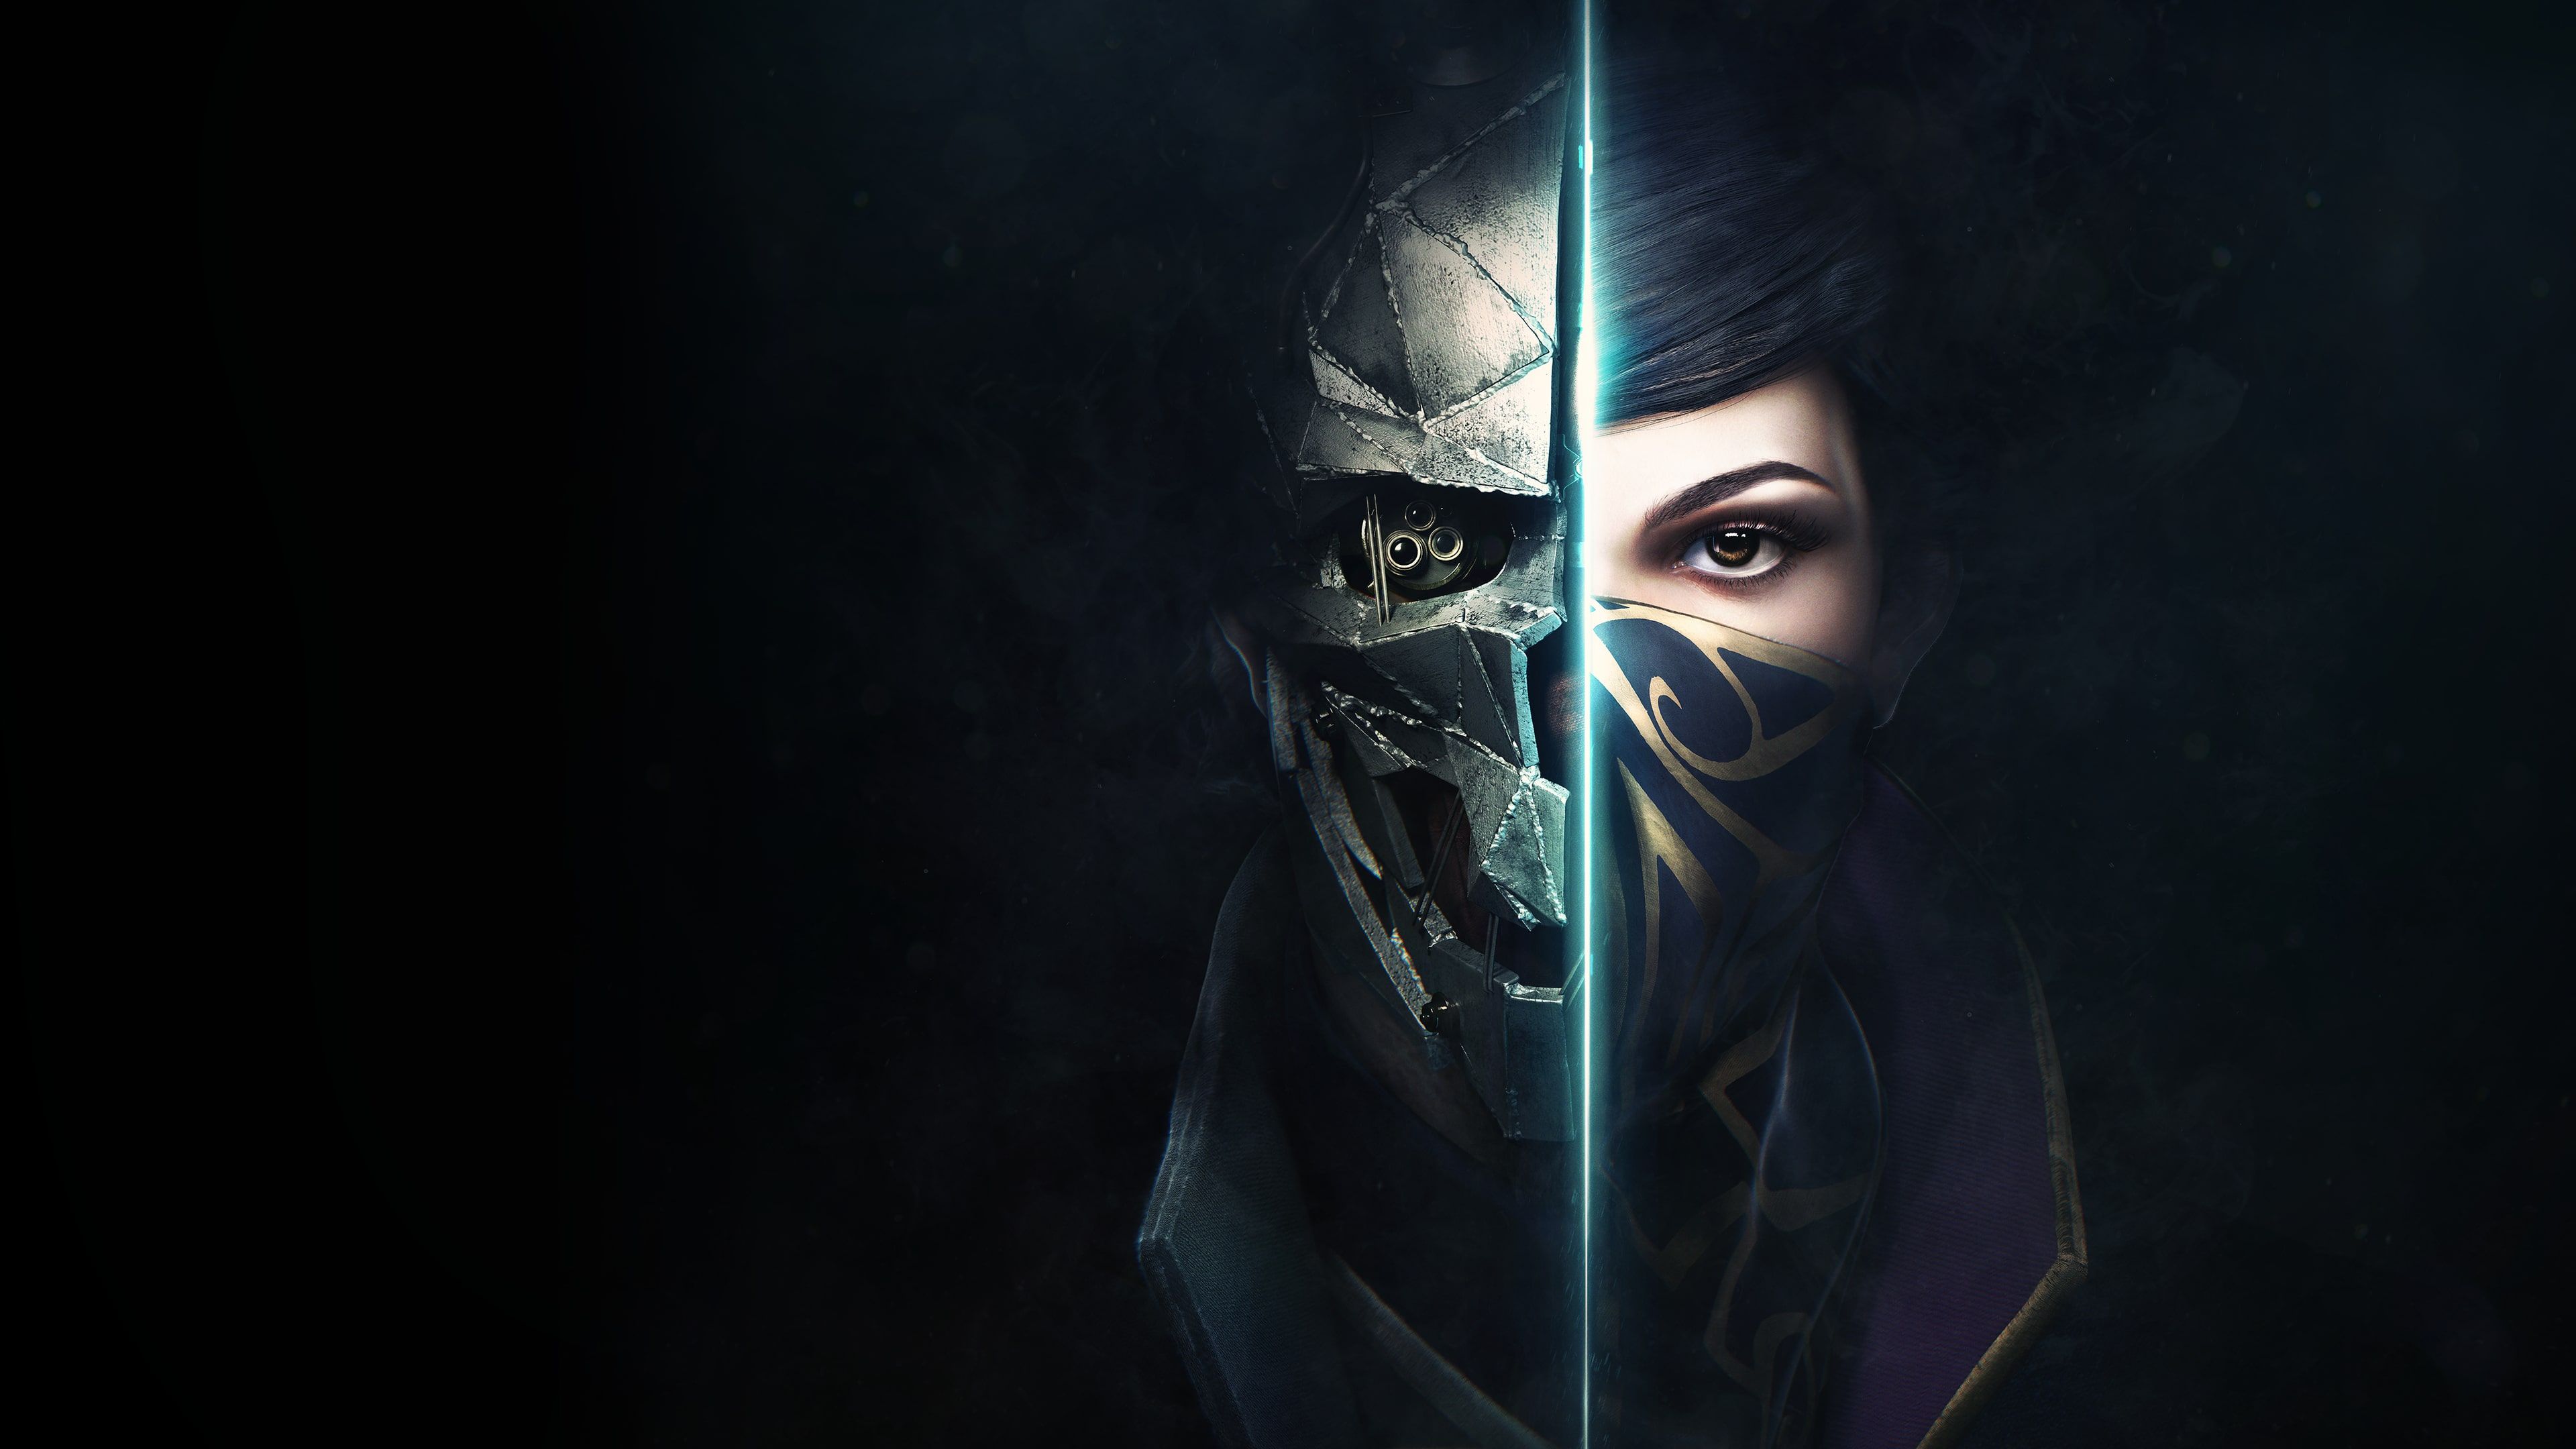 Dishonored 2 cover image